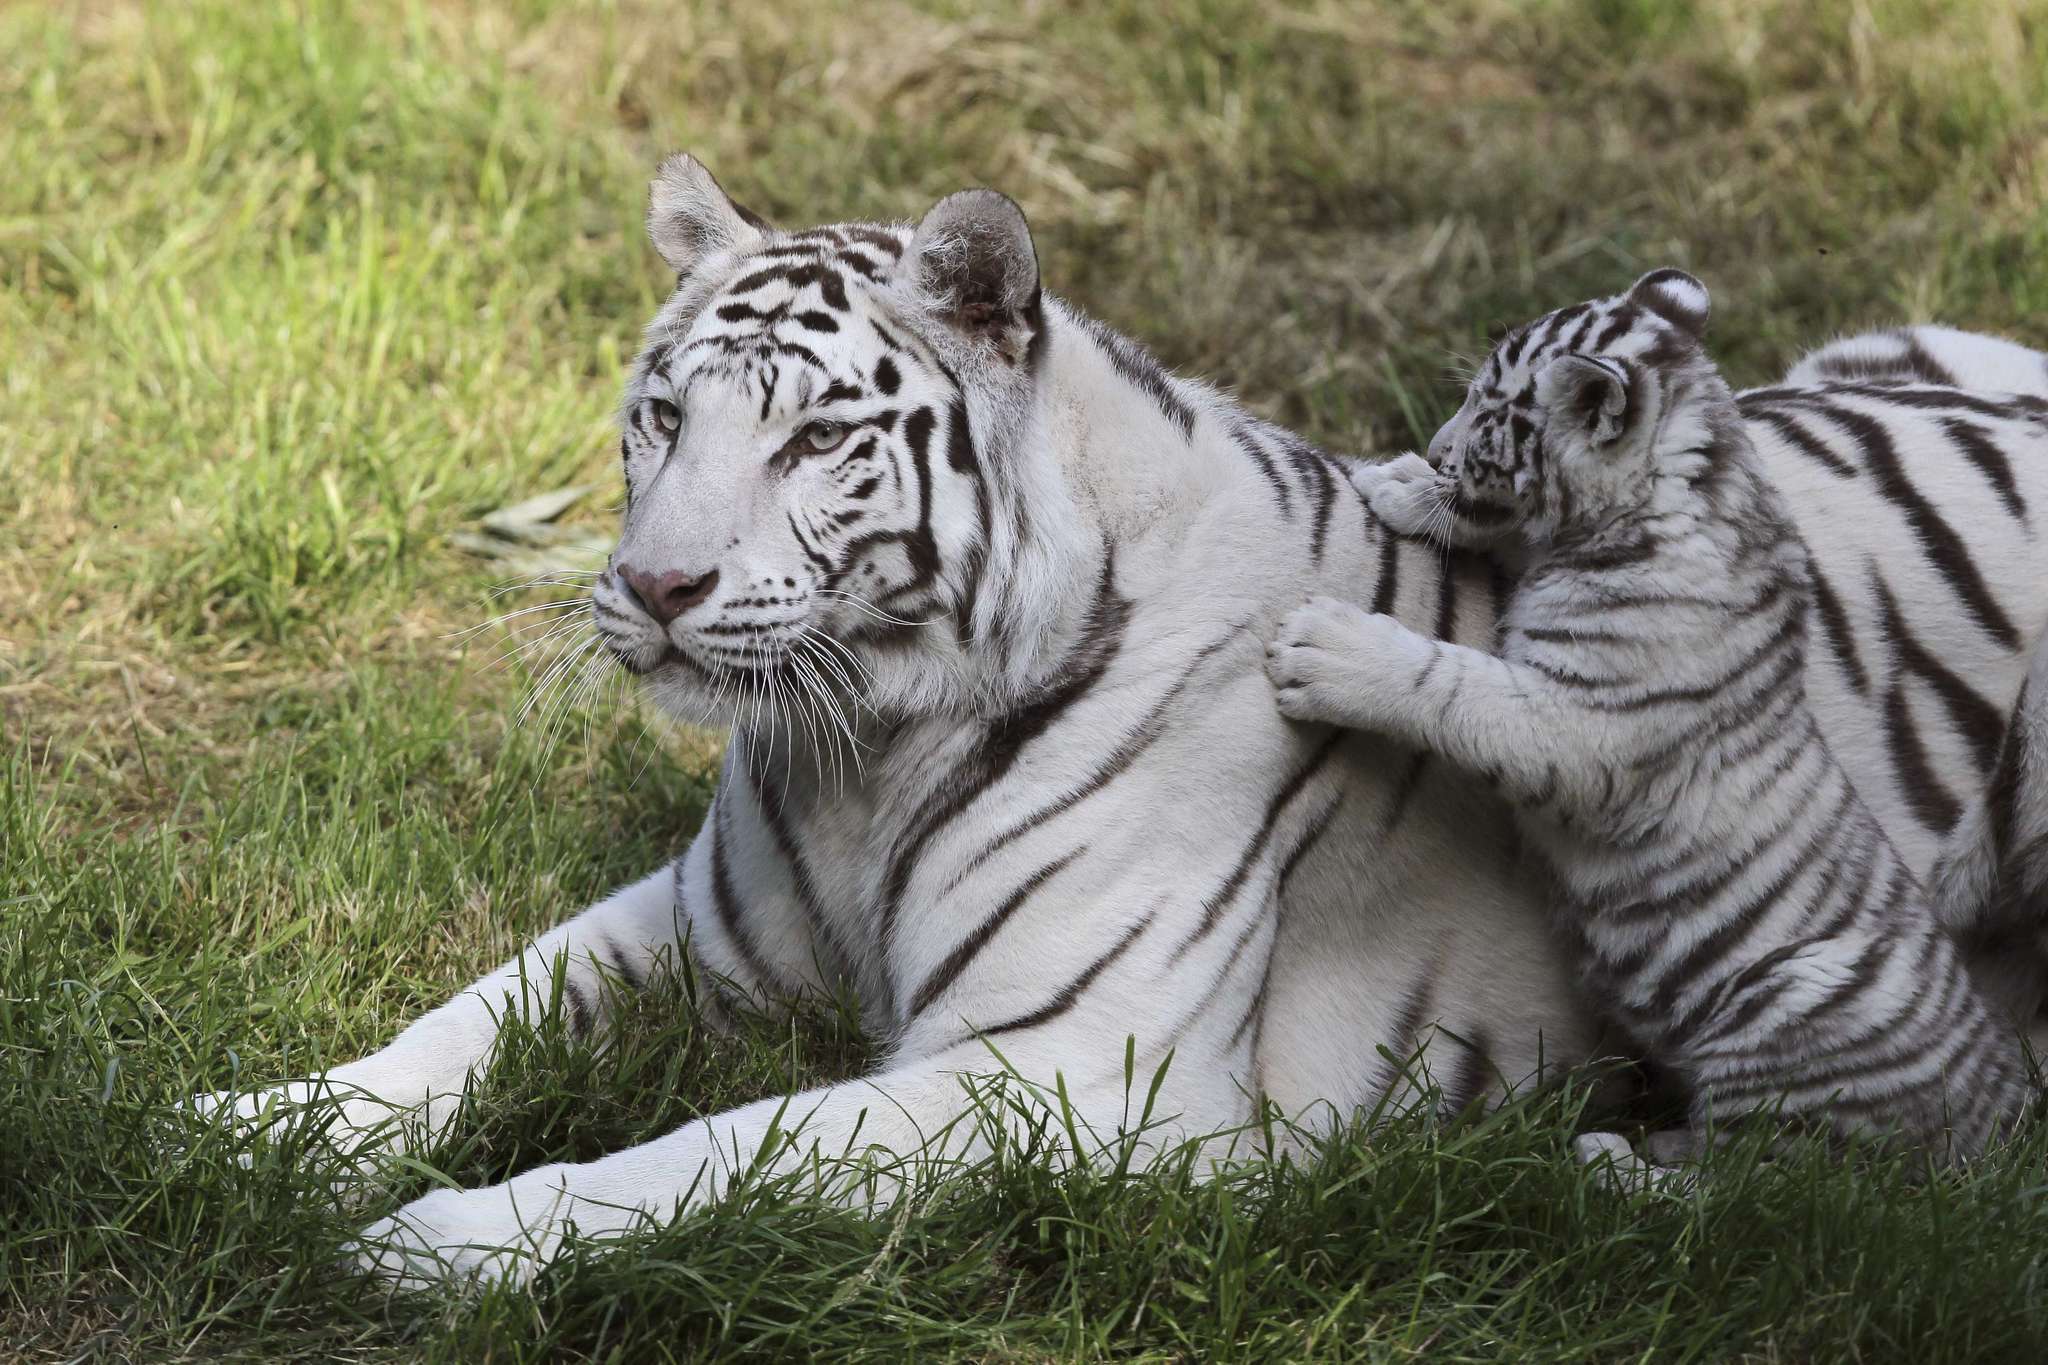 White tiger cubs maul new zookeeper to death in India - Chicago Tribune